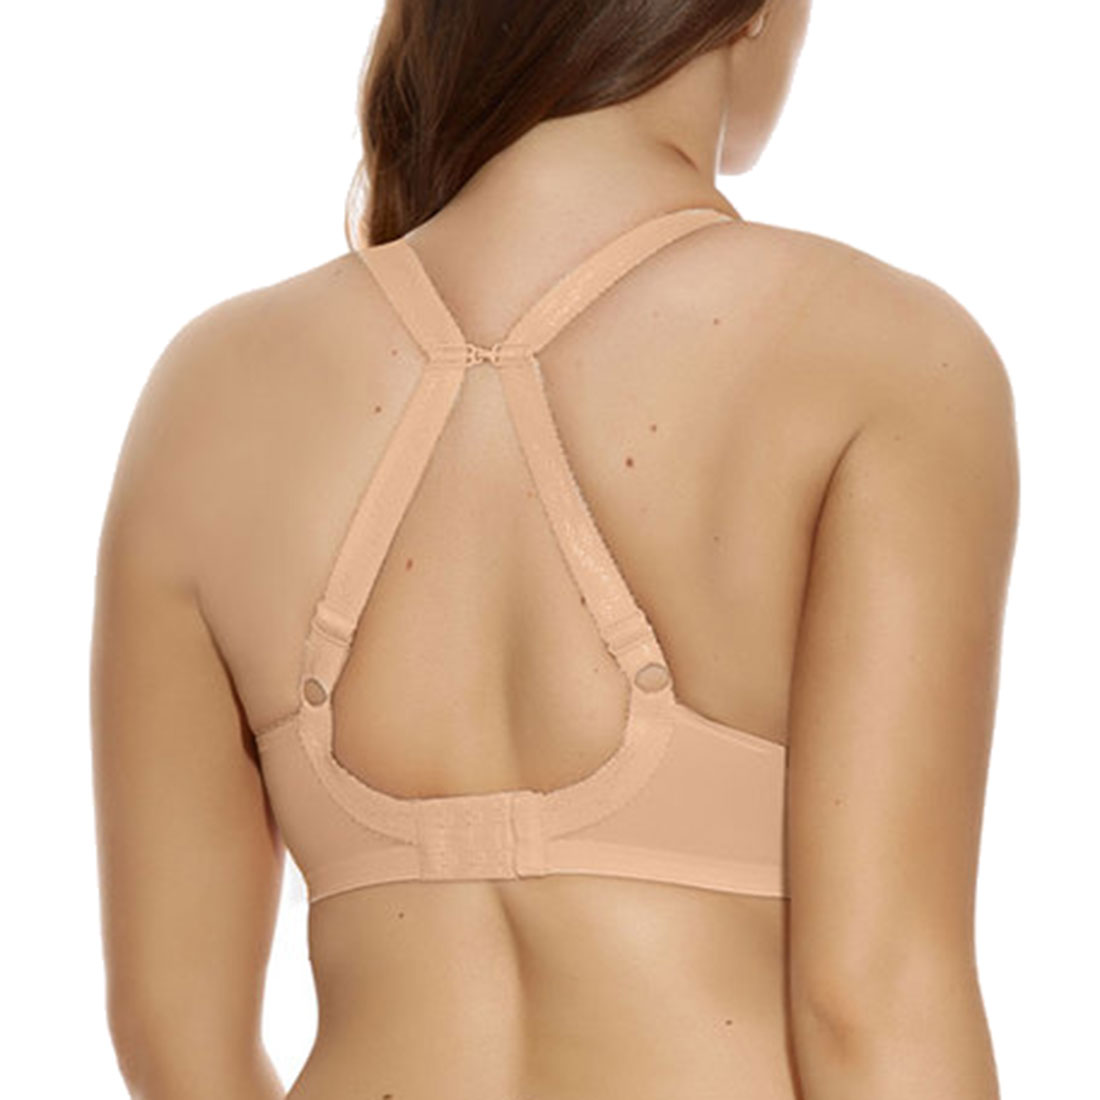 Elomi Womens Energise Underwire Sports Bra with J Hook, 38K, Nude